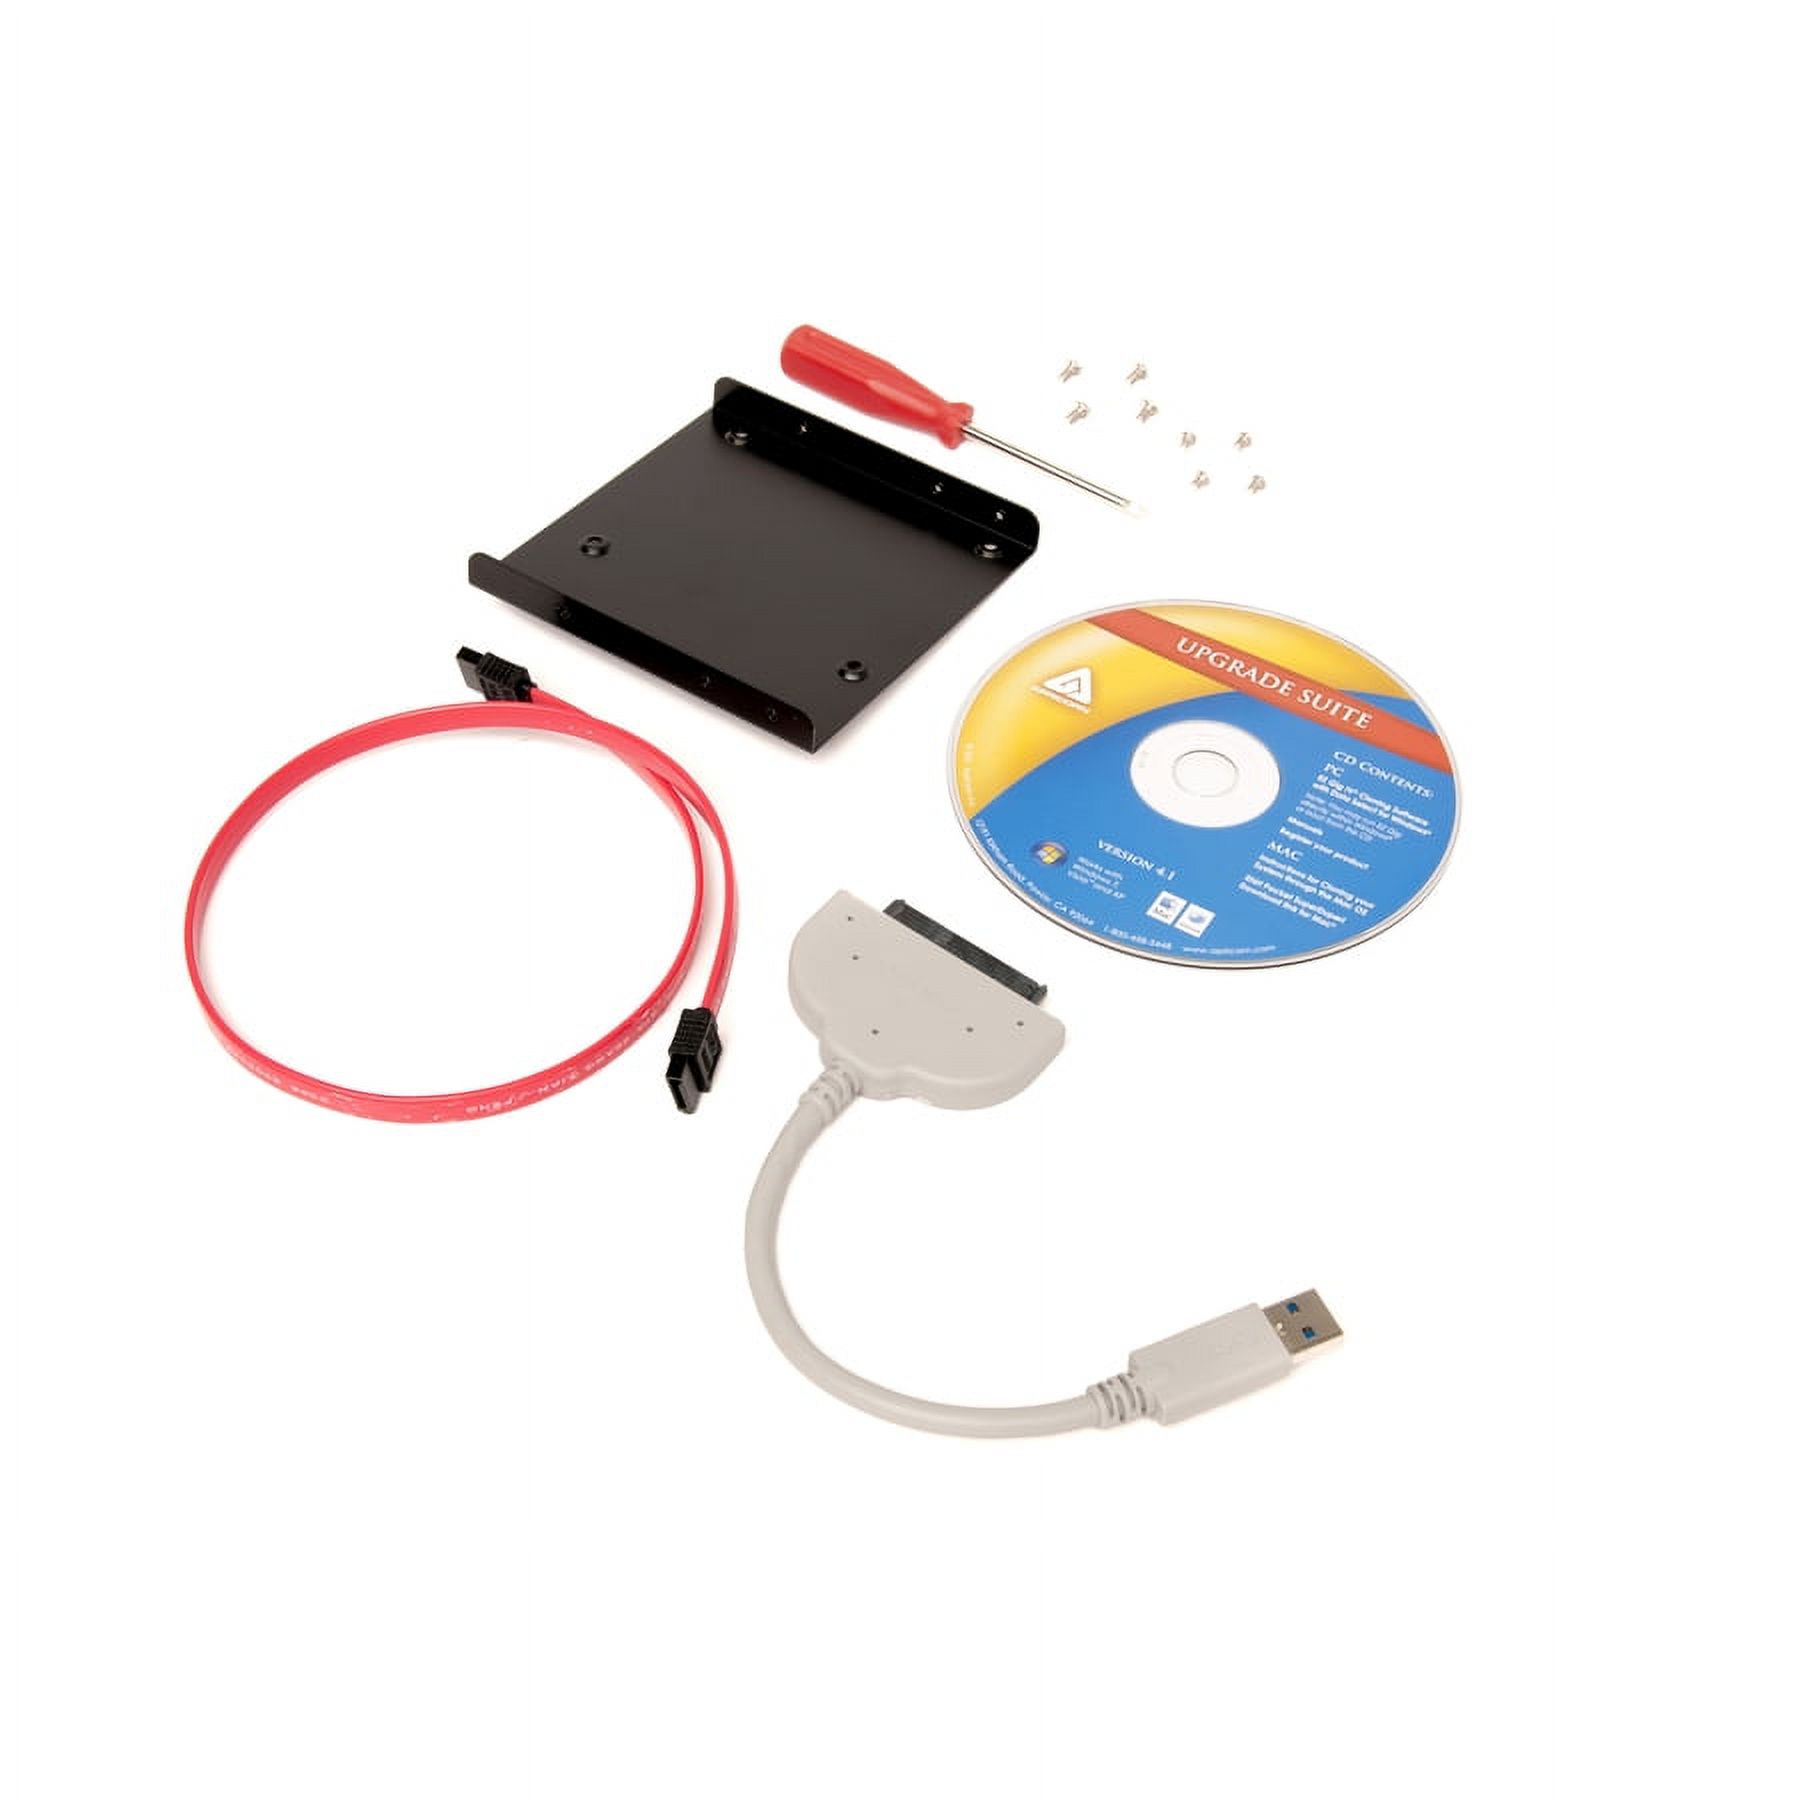 SSD Conversion Kit - image 2 of 2